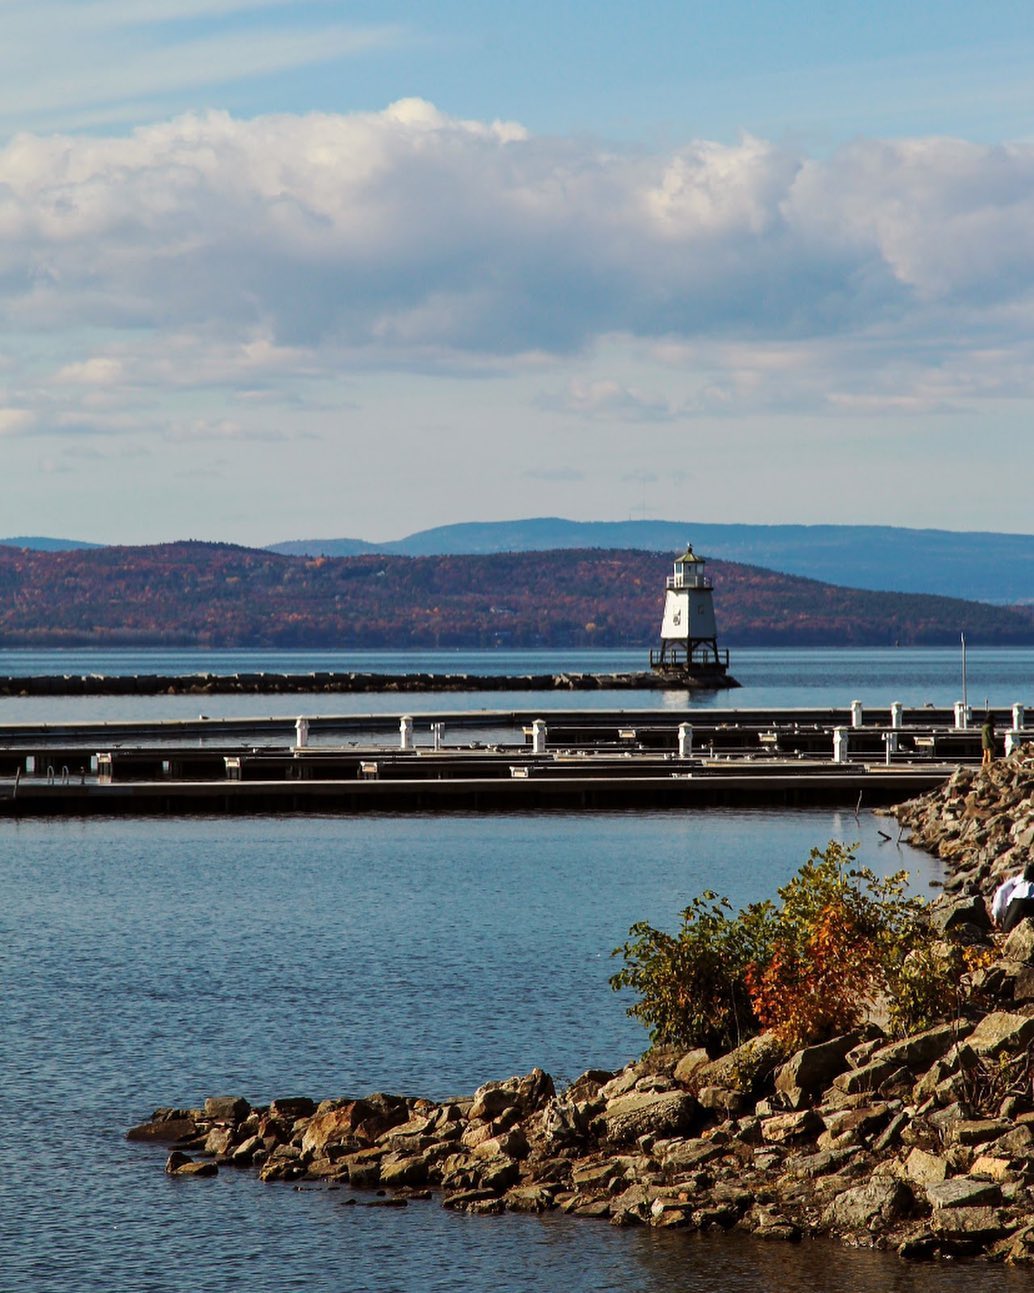 Lighthouse in the Bay in Burlington, VT. Photo by Instagram user @hannahmacleanphotos